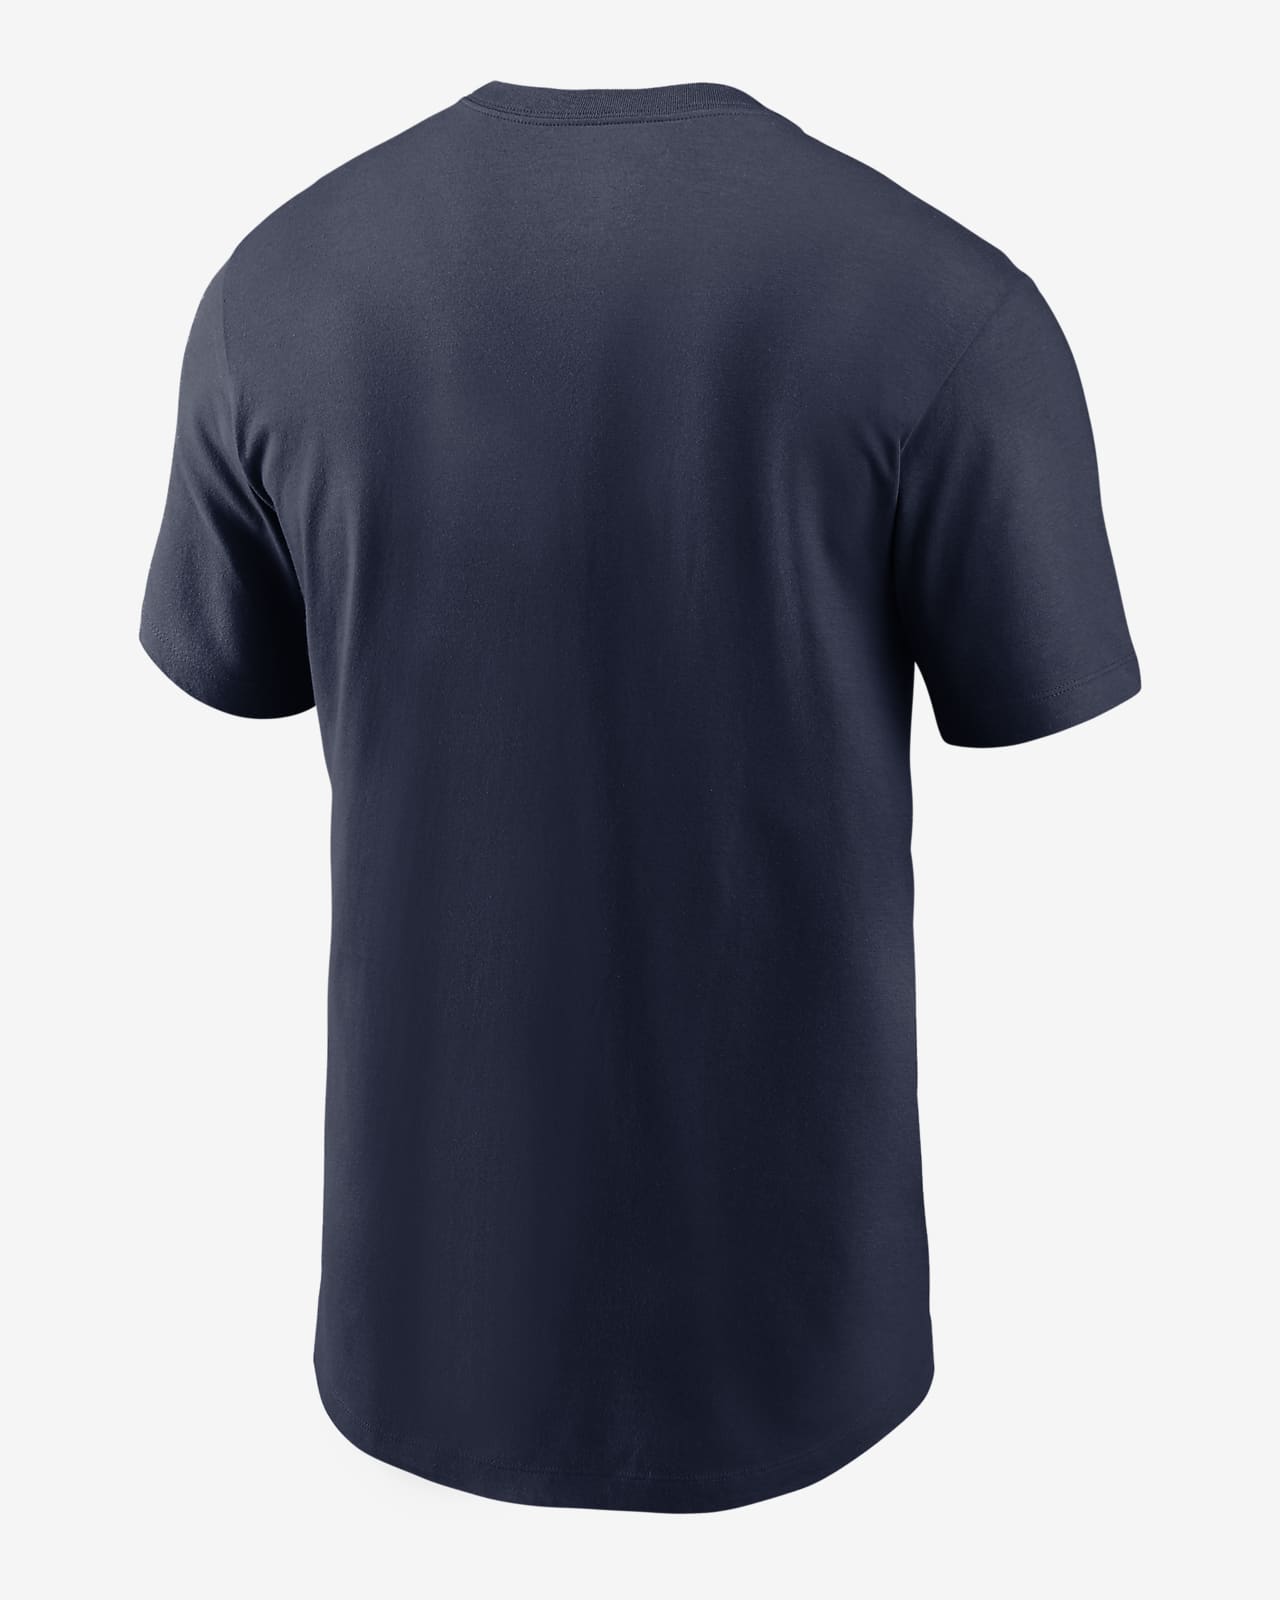 Dallas Cowboys NFL Hold Down The East Champions NIKE T- - Dallas